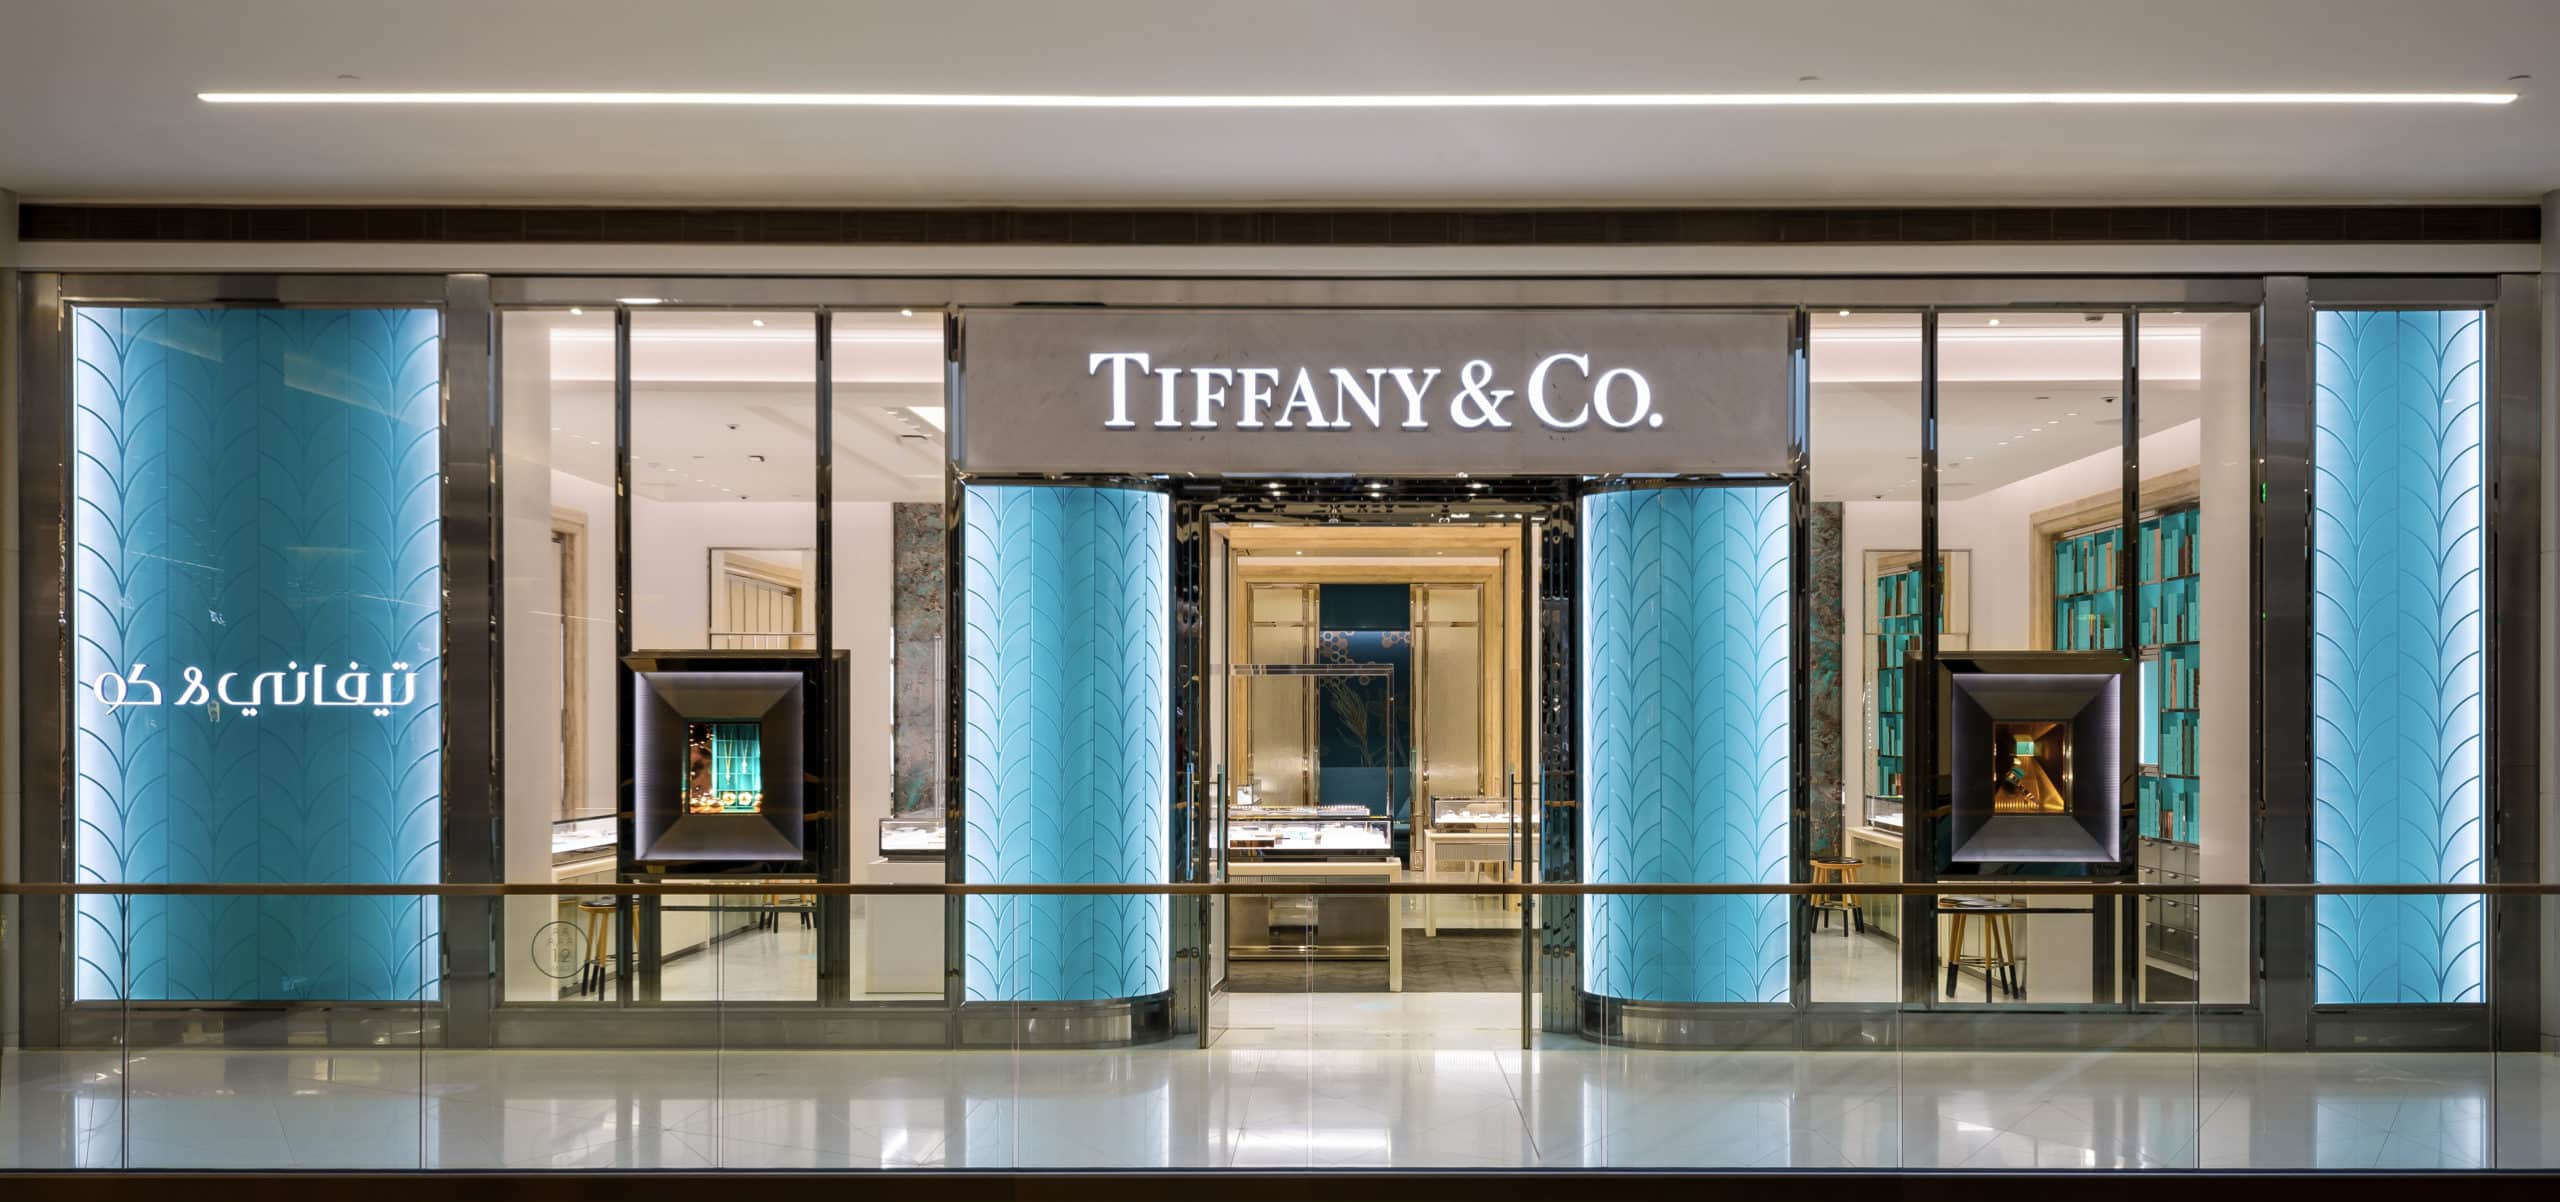 Inside Tiffany & Co.'s Stunning New Flagship Store on 5th Avenue